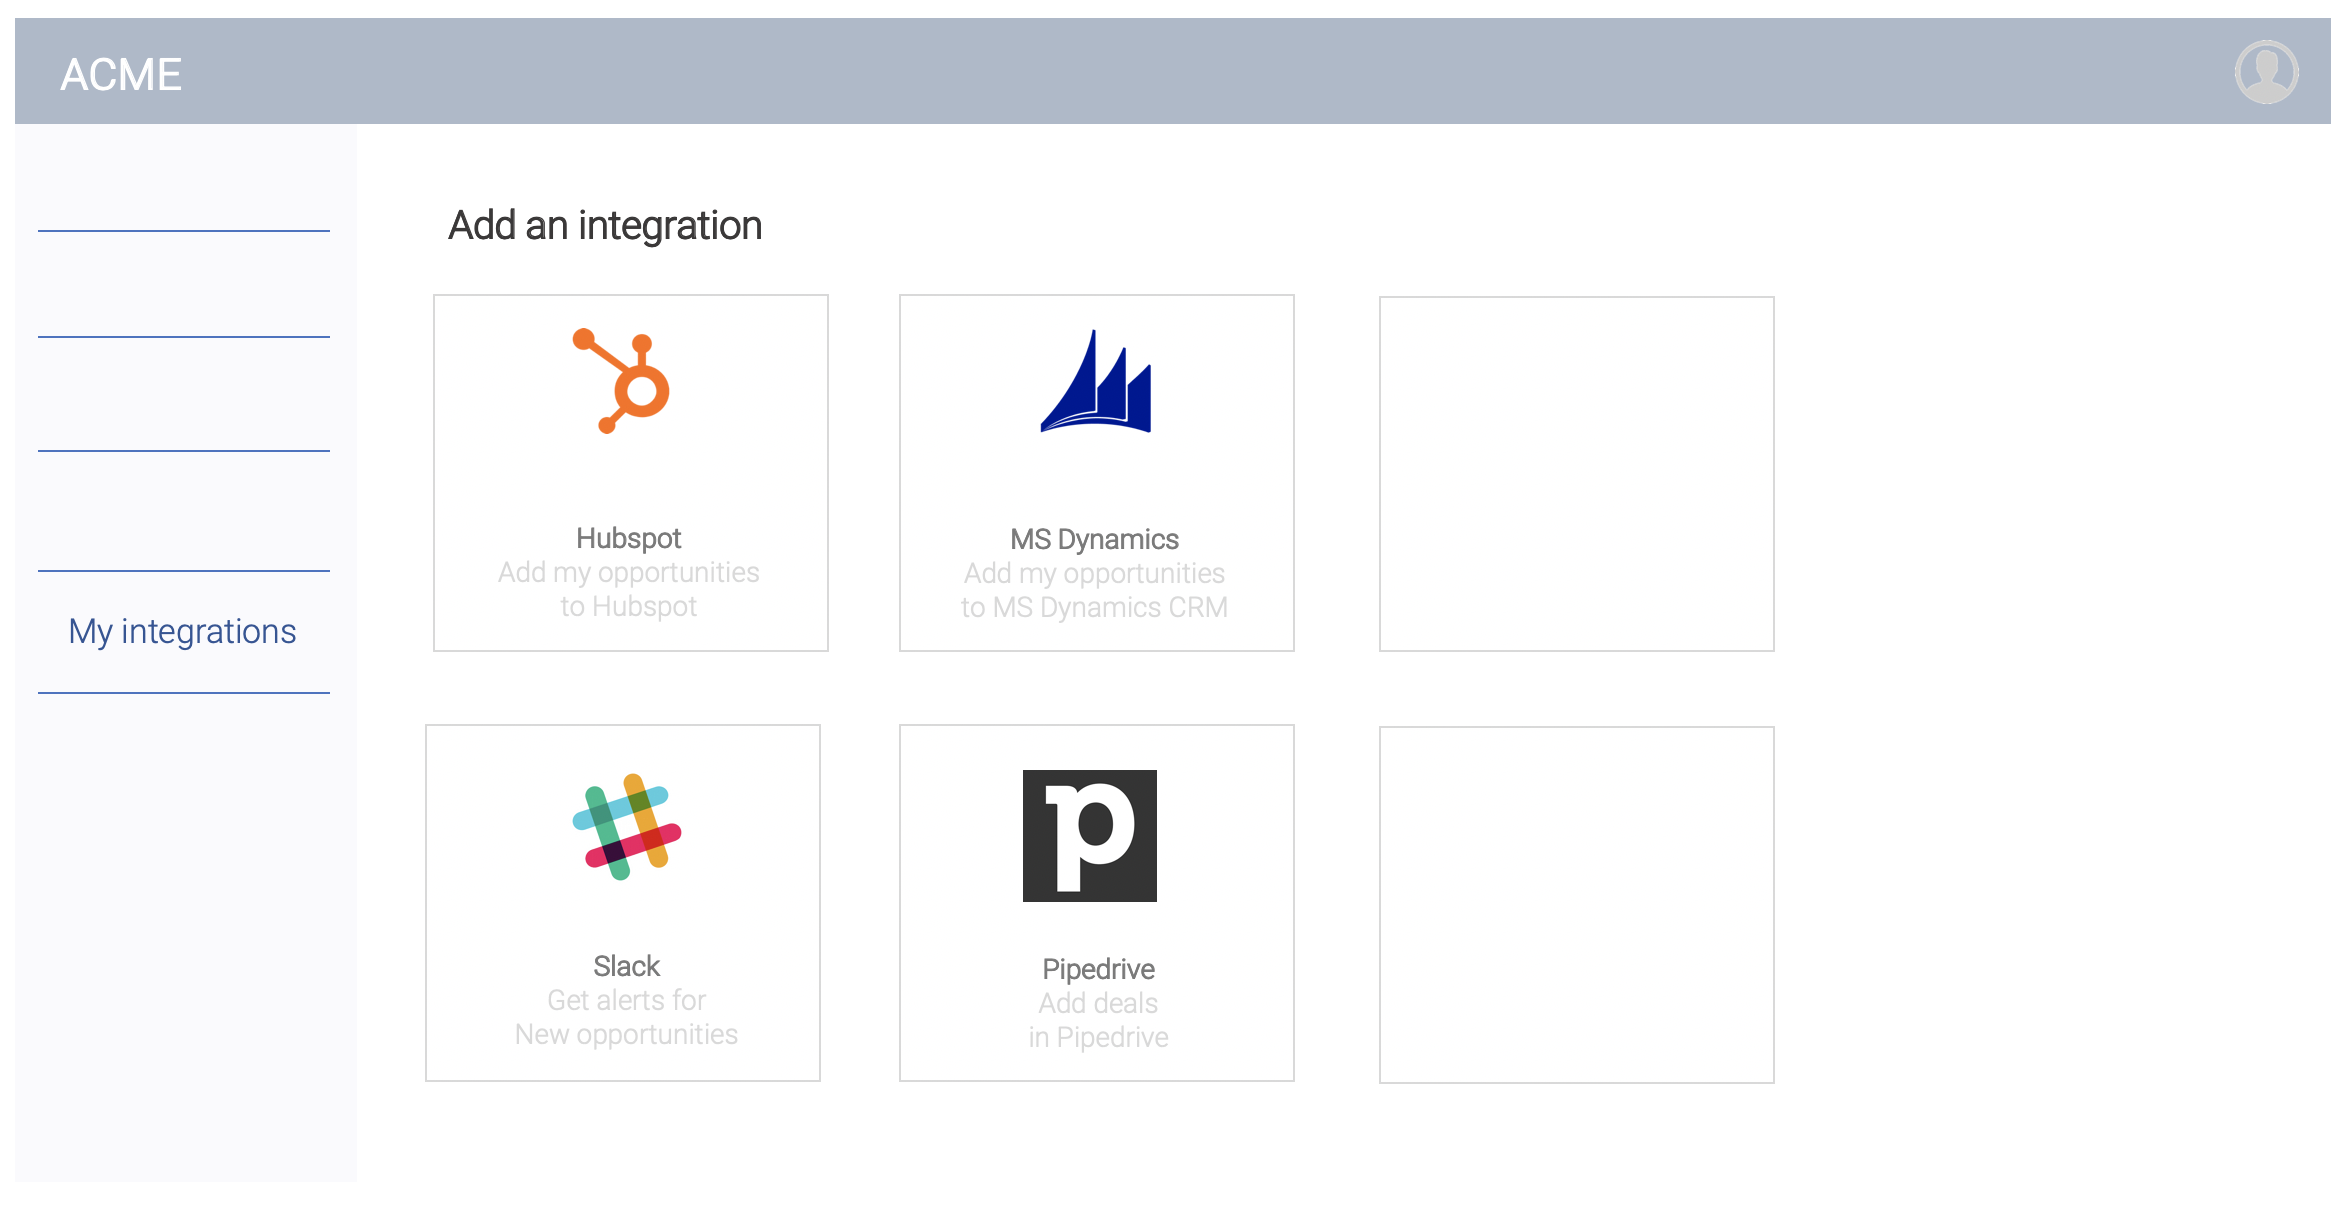 The My Integrations button shows a list of integrations that can be added.